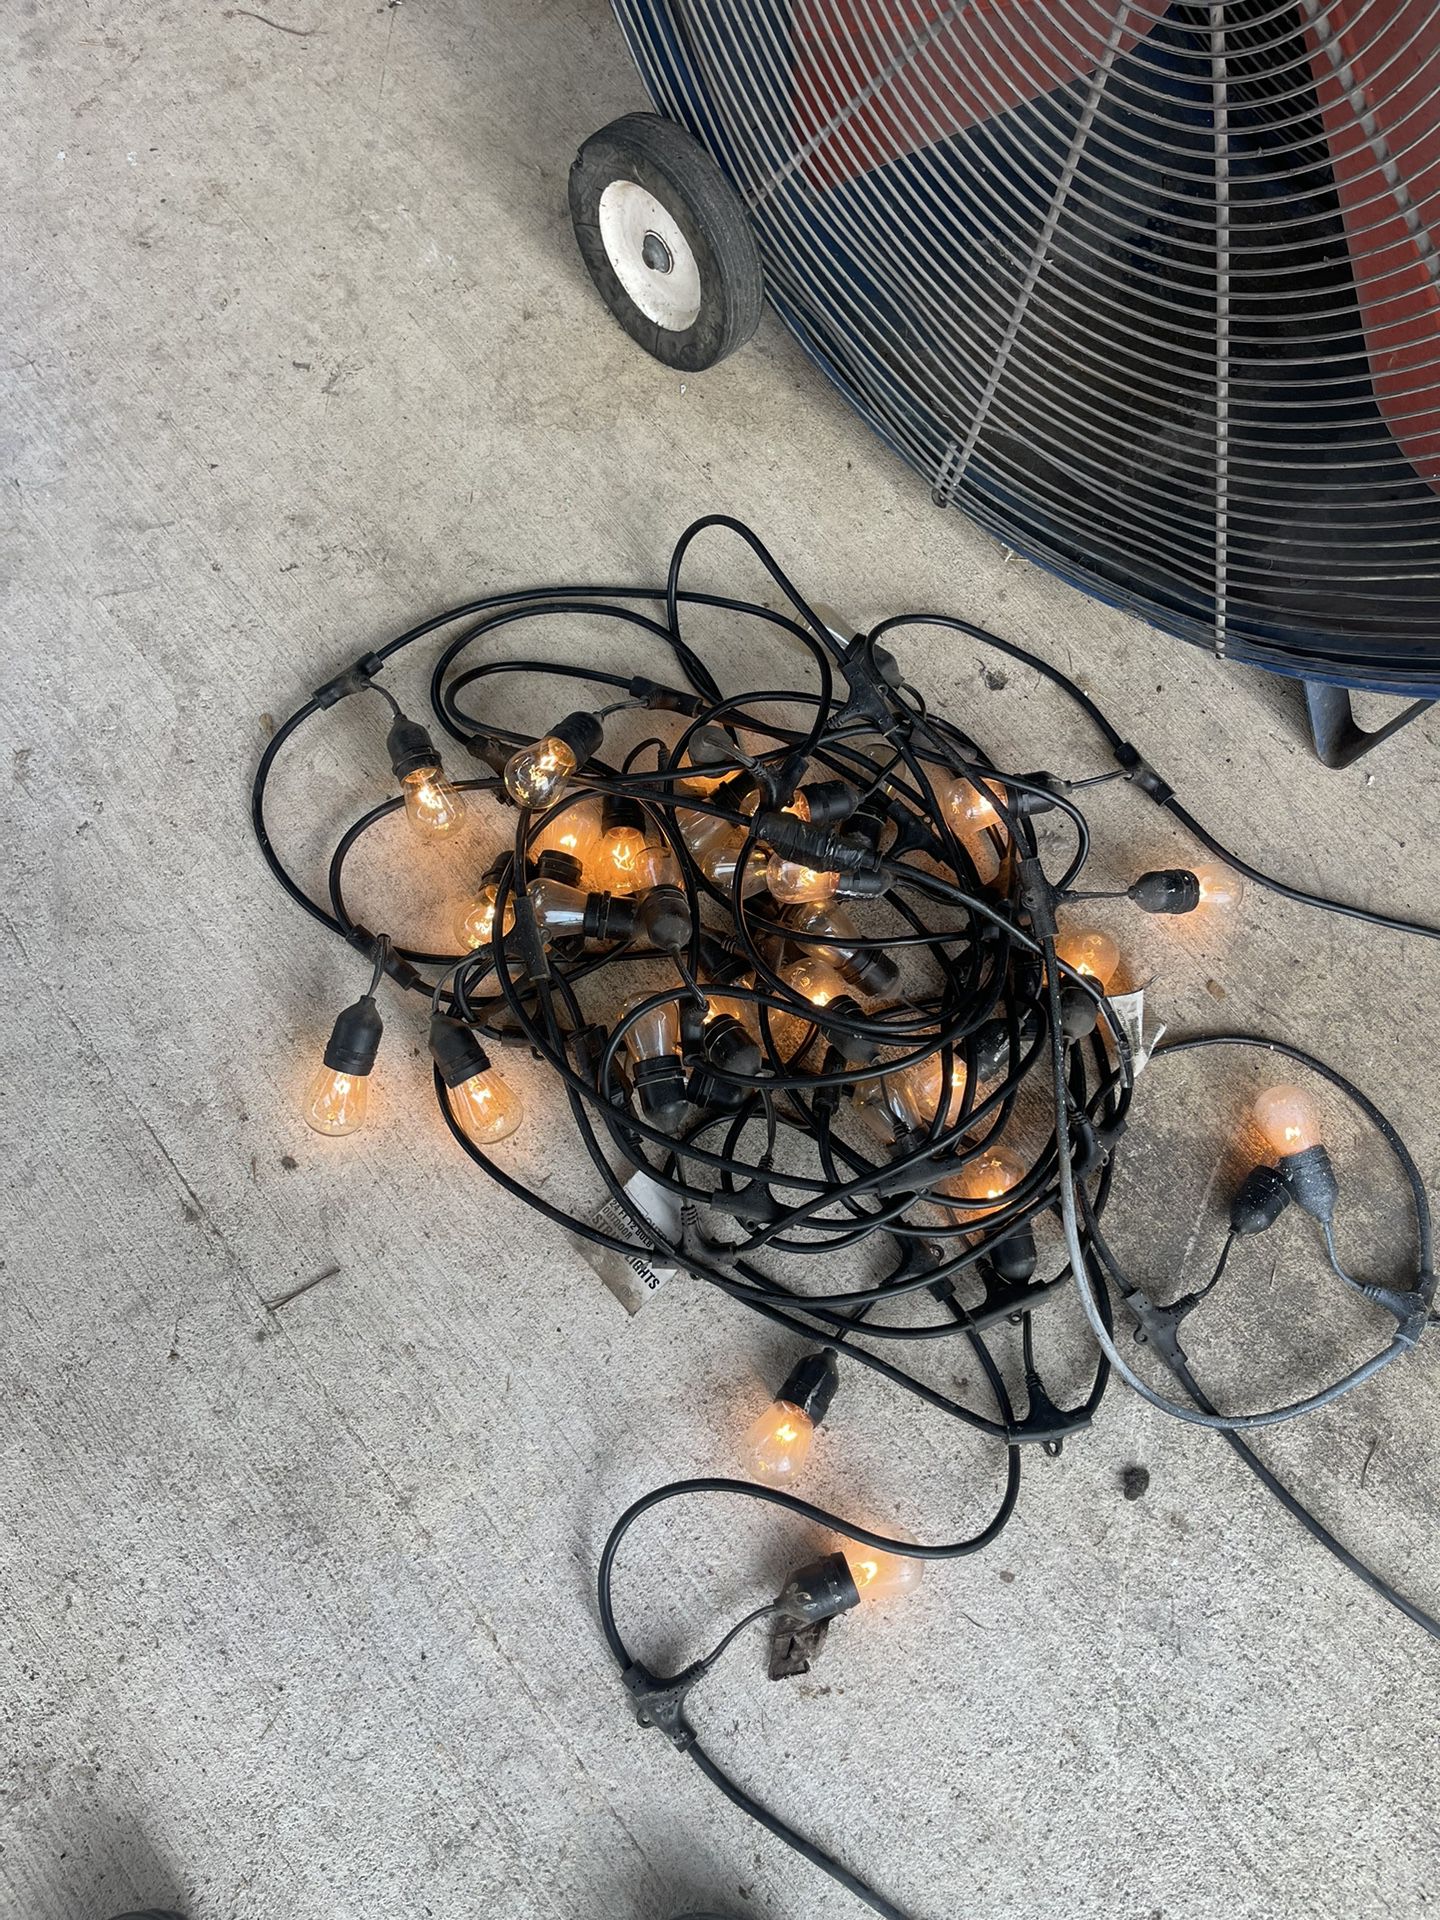 Outdoor Lights 5 Or 6 Strands  20. Dollars For All